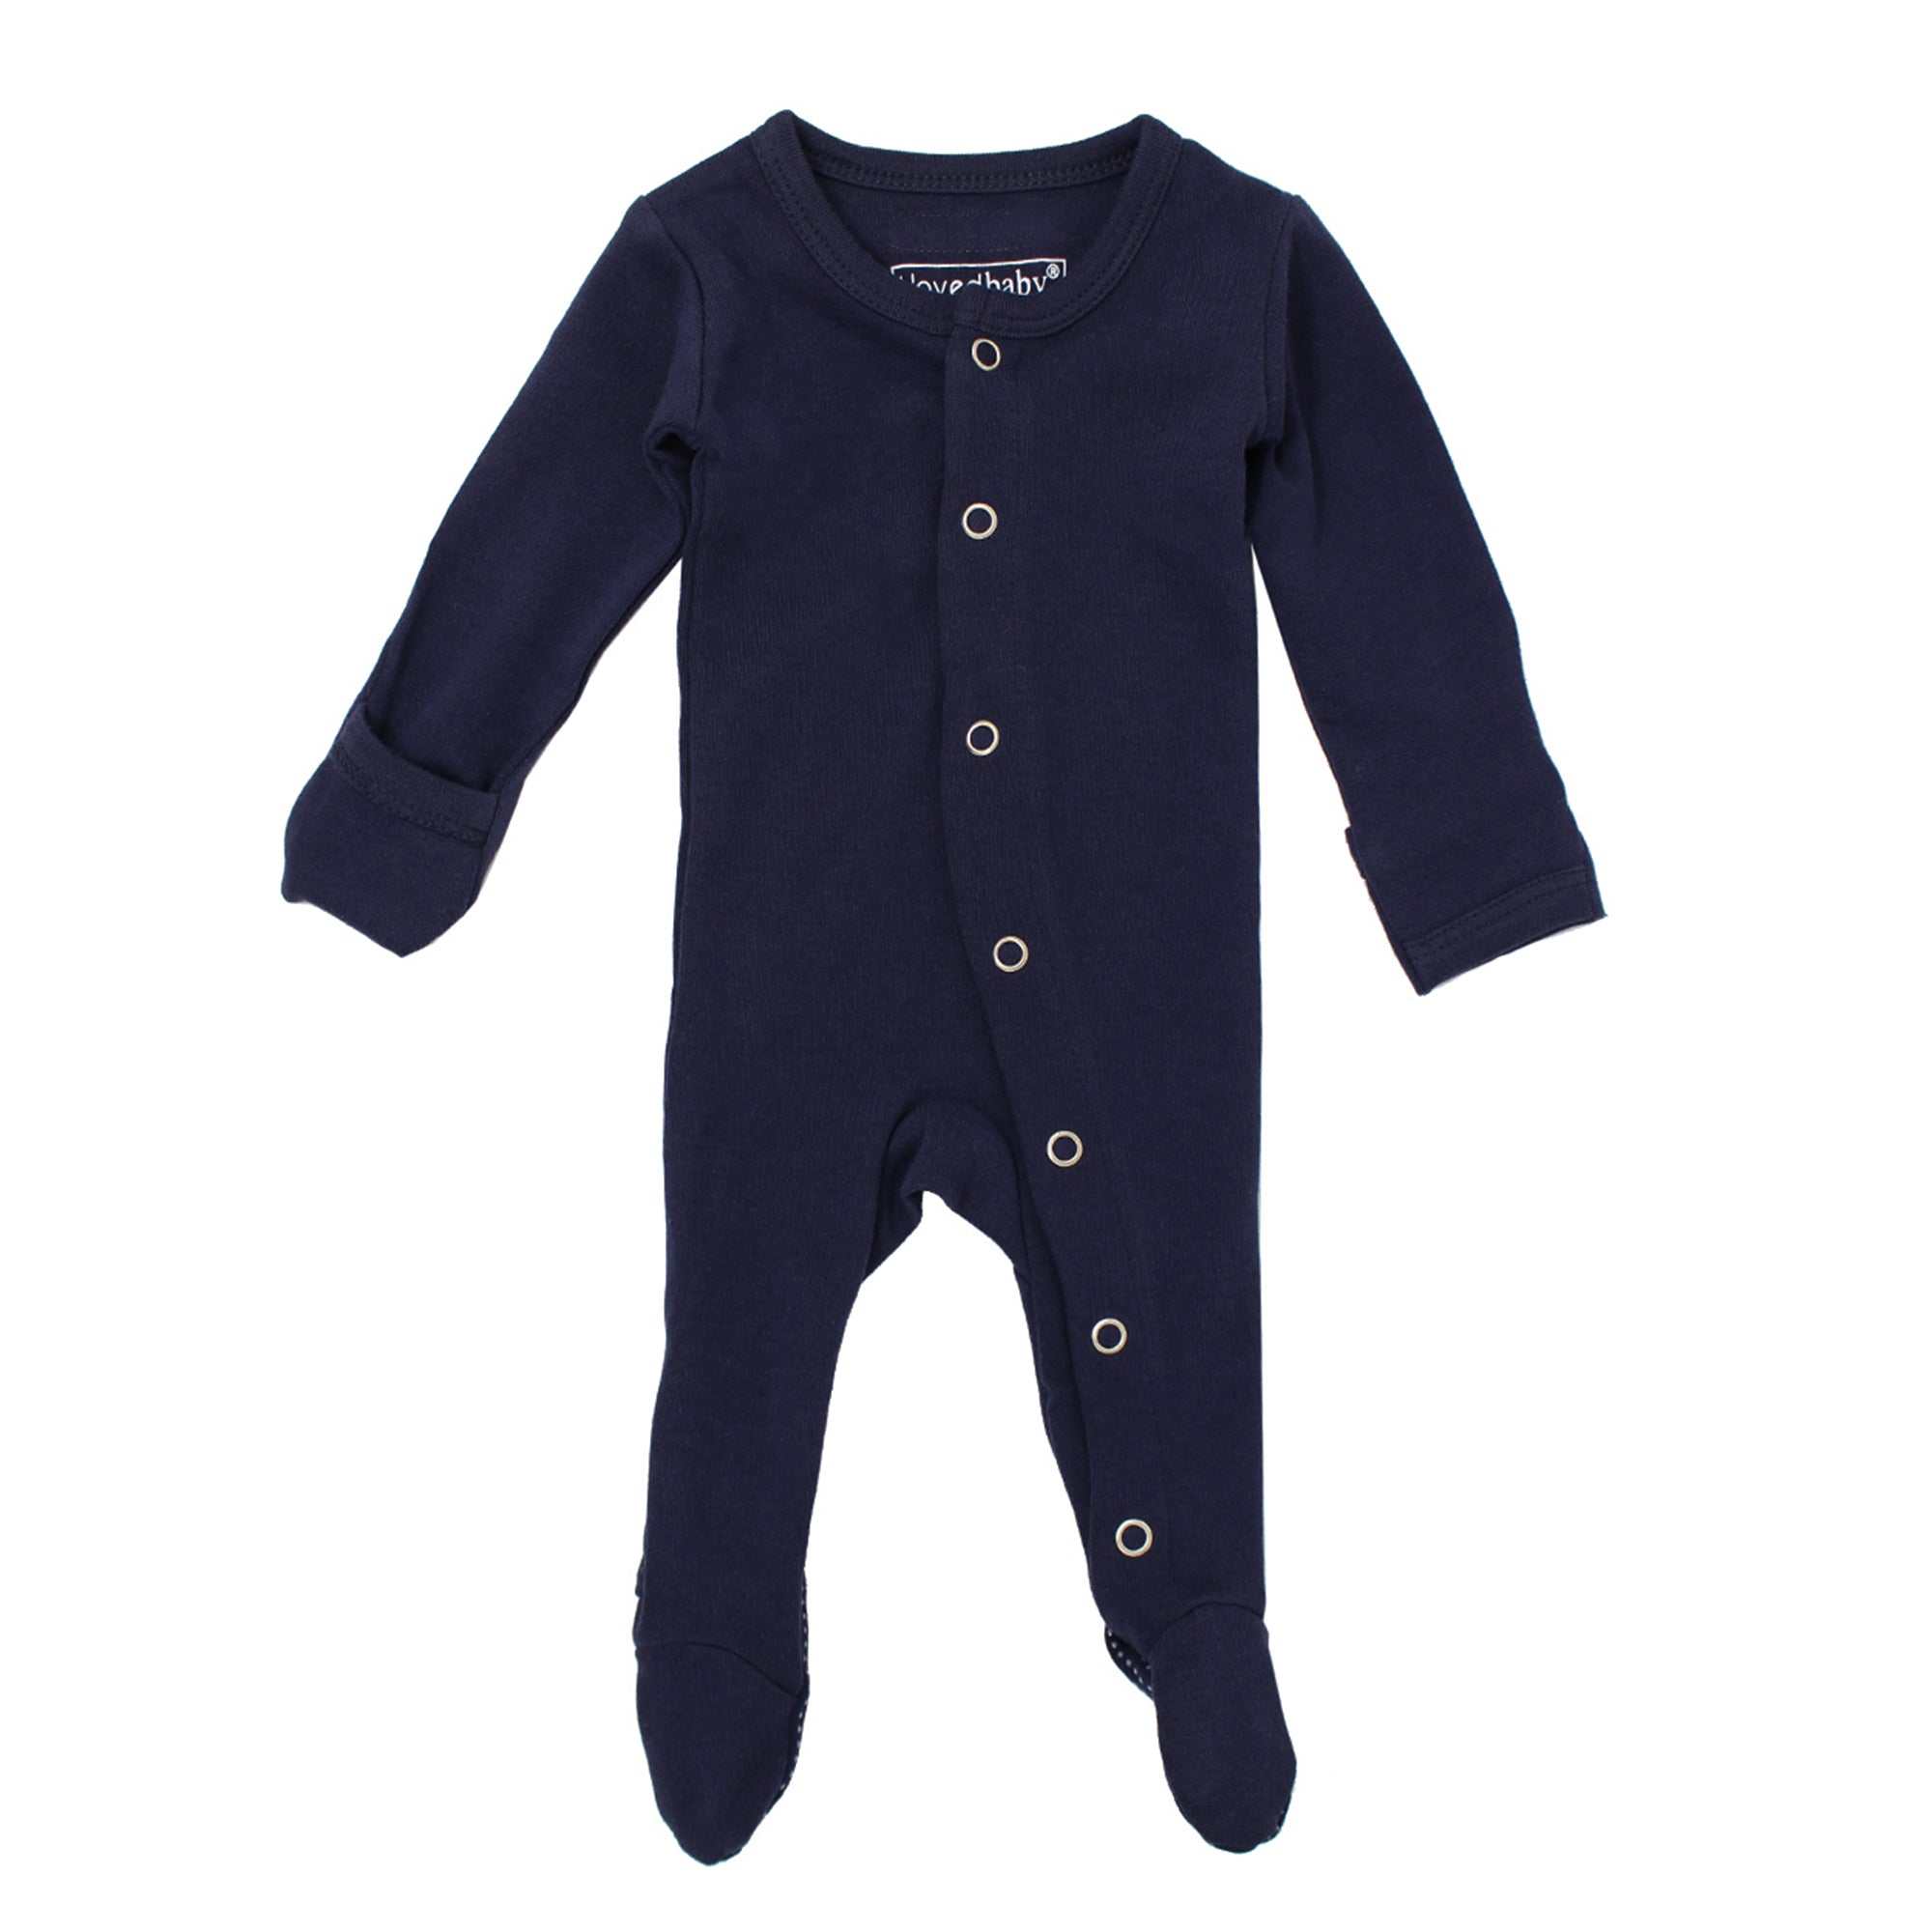 L'ovedbaby Footie Navy - Little Bambino Bear